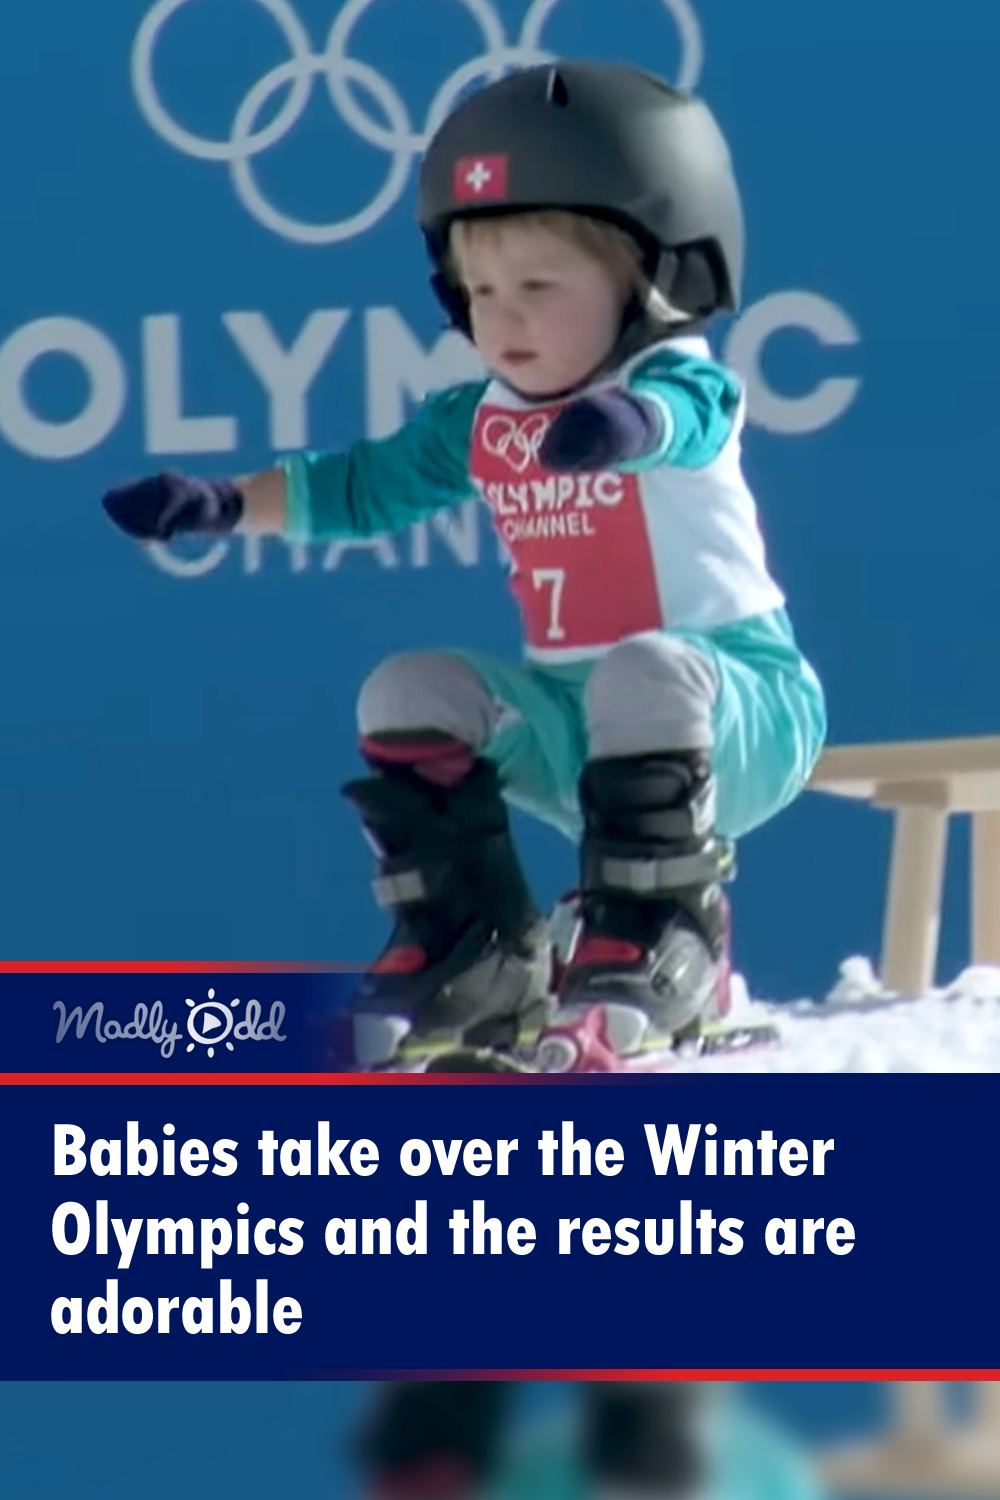 Babies take over the Winter Olympics and the results are adorable